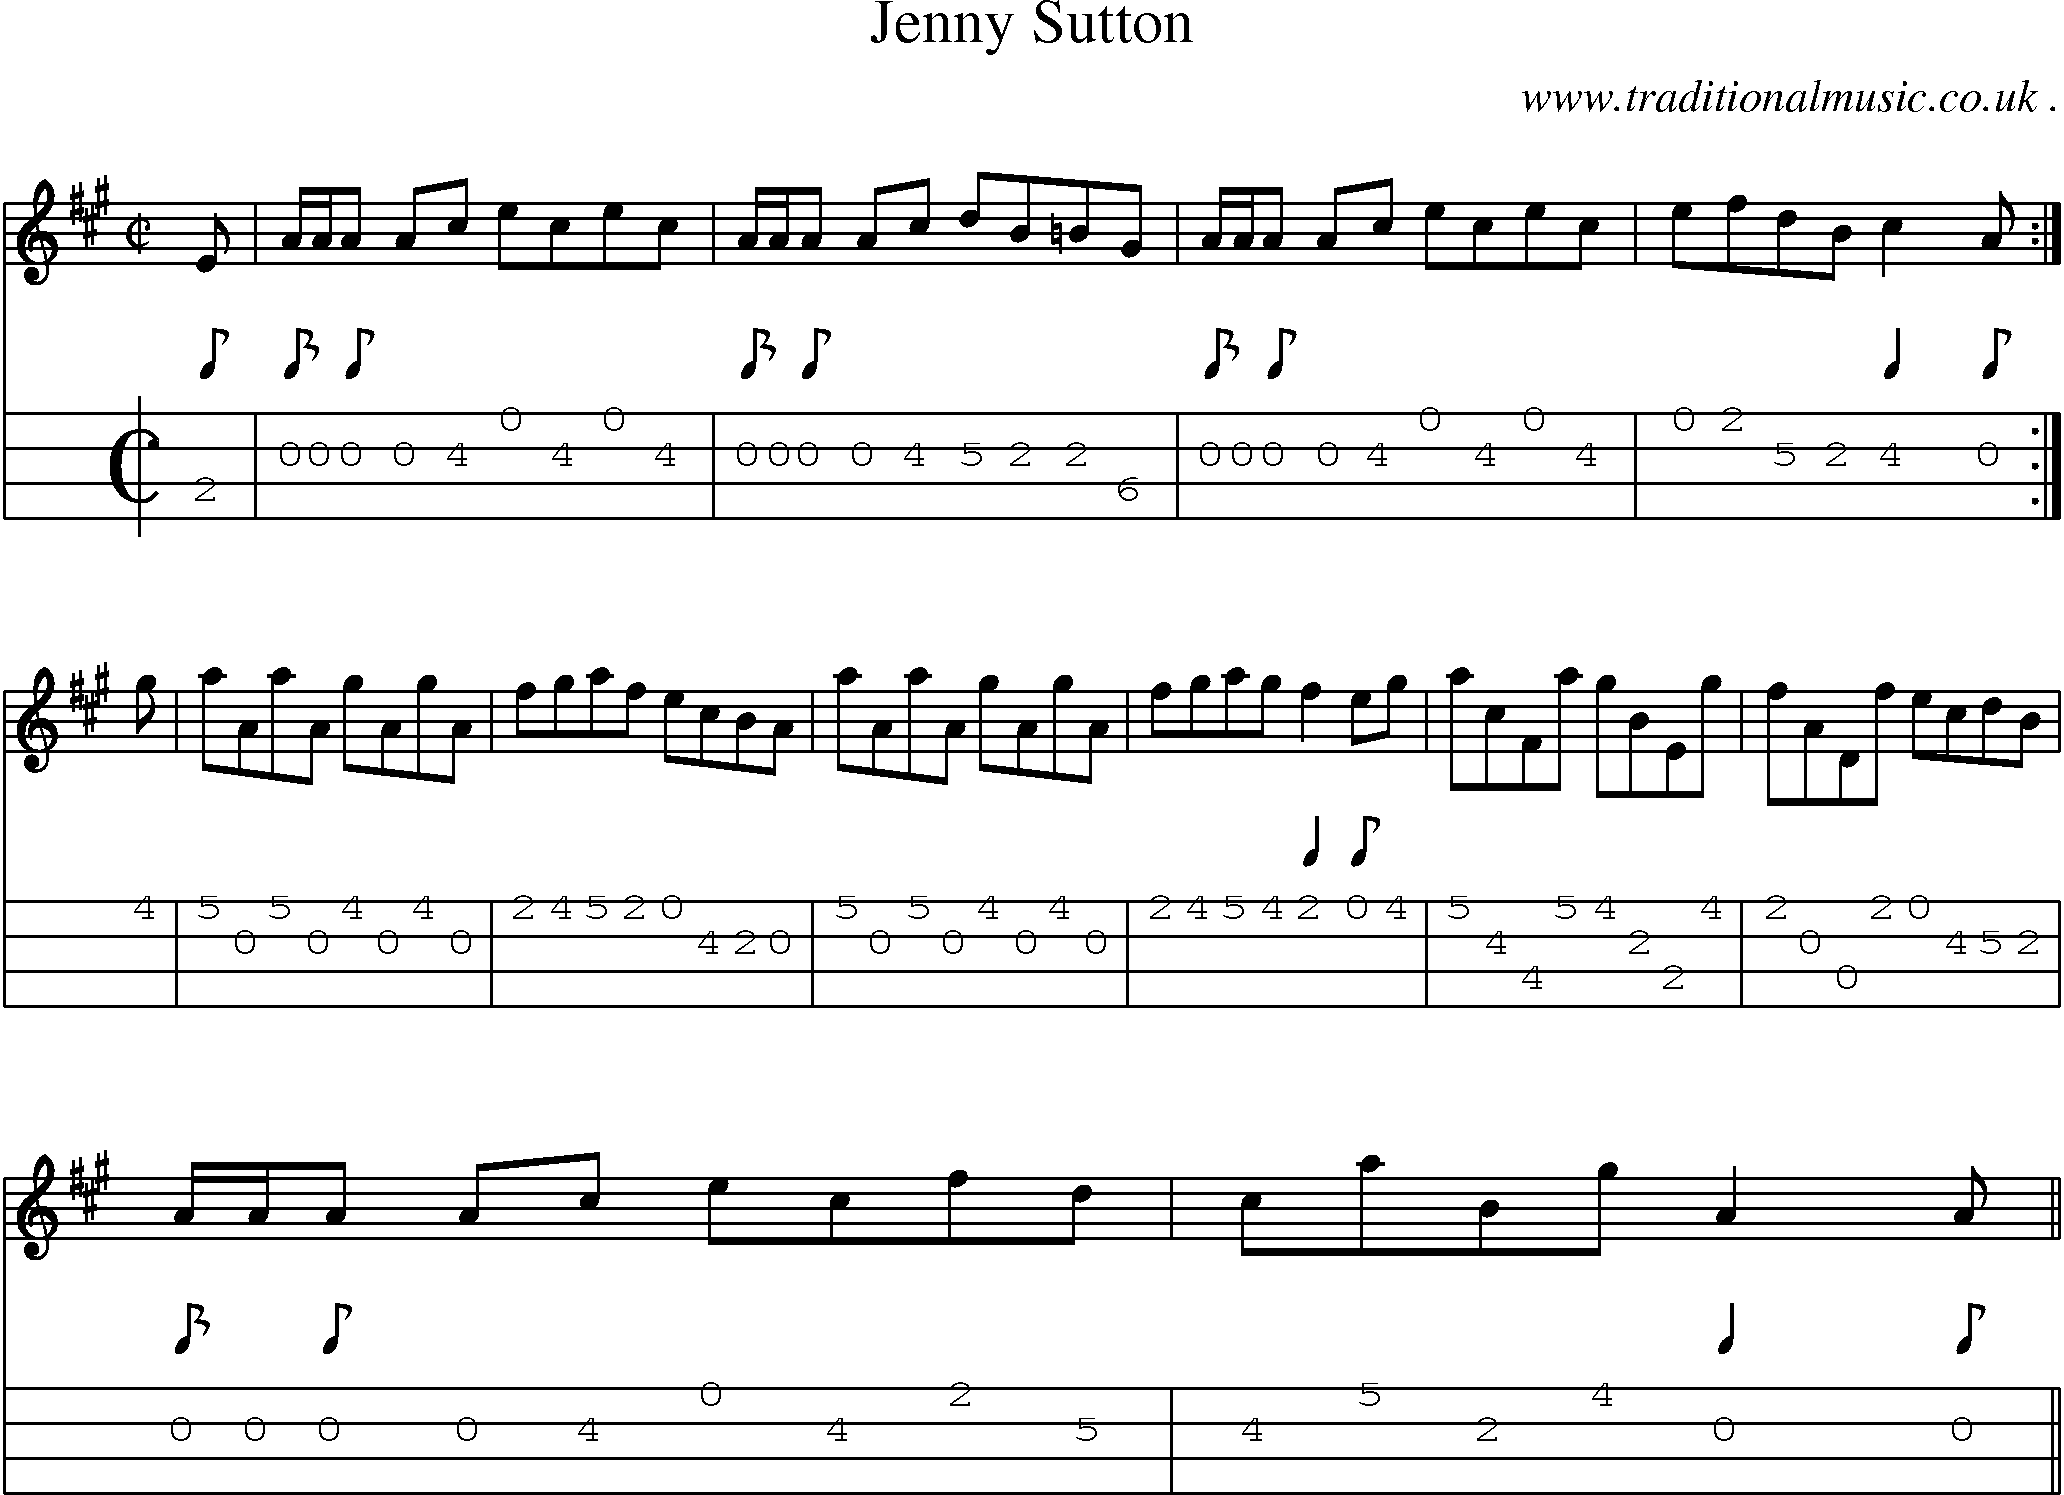 Sheet-music  score, Chords and Mandolin Tabs for Jenny Sutton